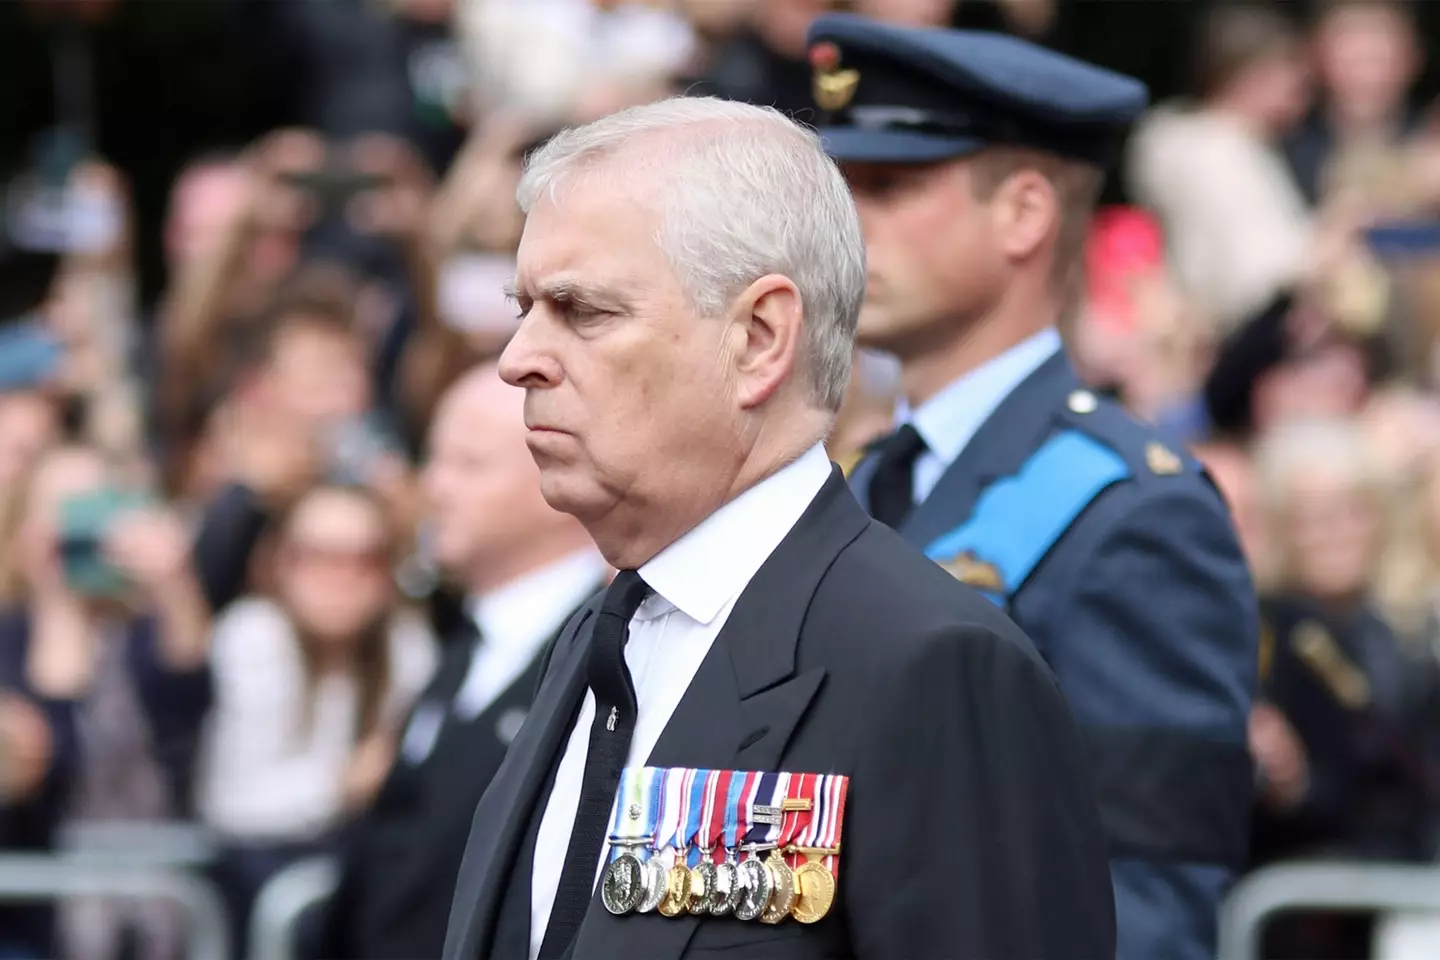 A lawyer for victims of Jeffrey Epstein seems to have a warning for Prince Andrew.